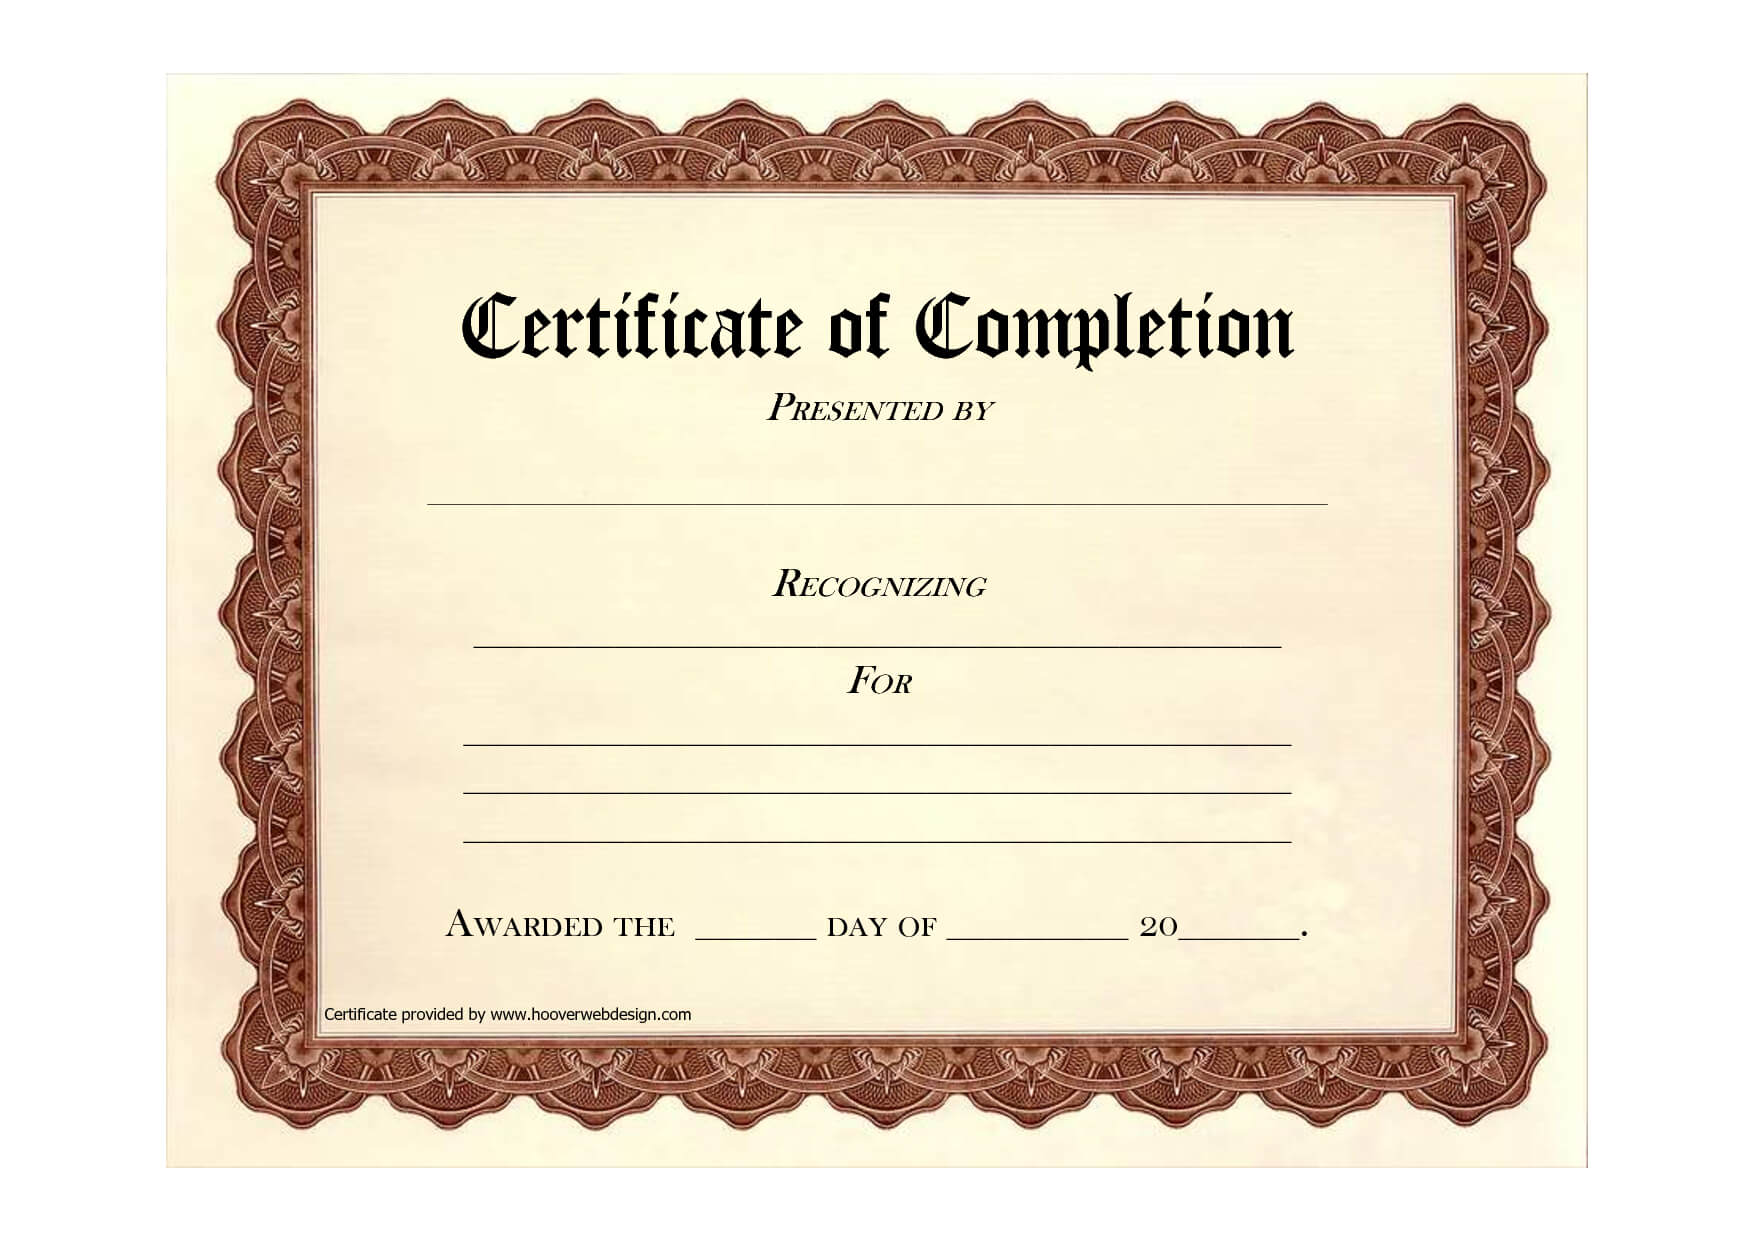 10 Certificate Of Completion Templates Free Download Images For Certificate Of Completion Template Free Printable